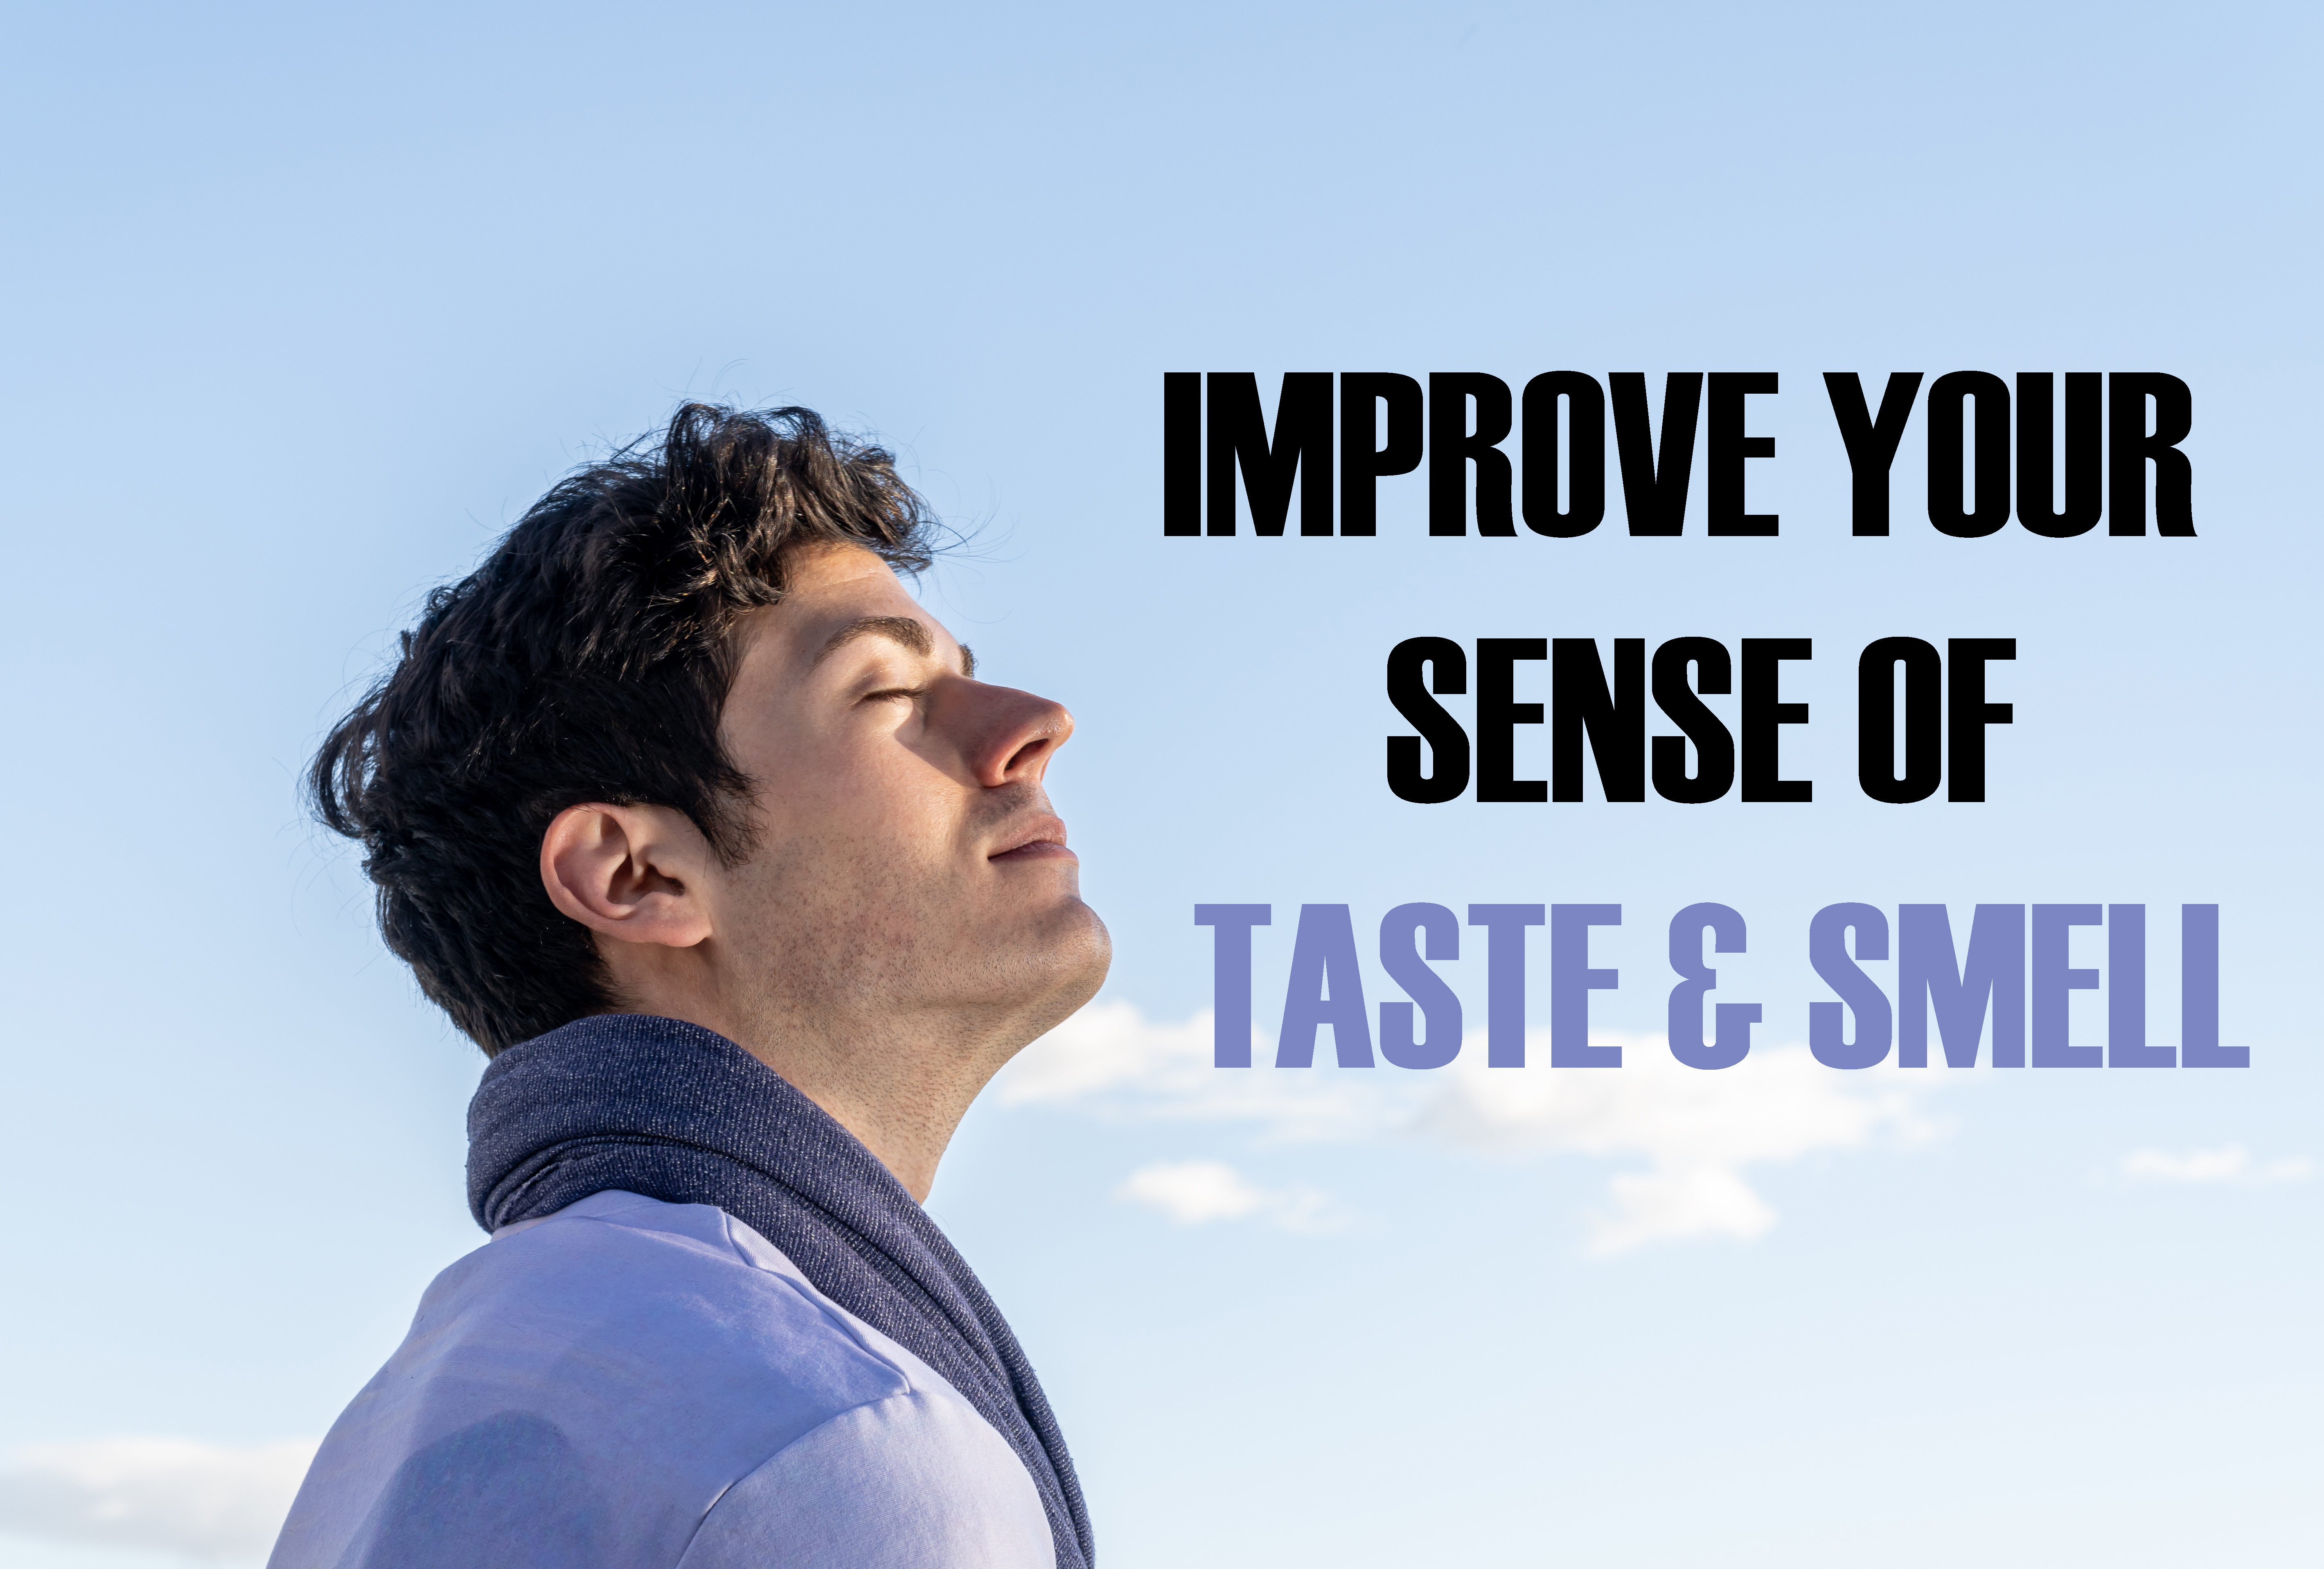 Improve Your Sense of Taste and Smell